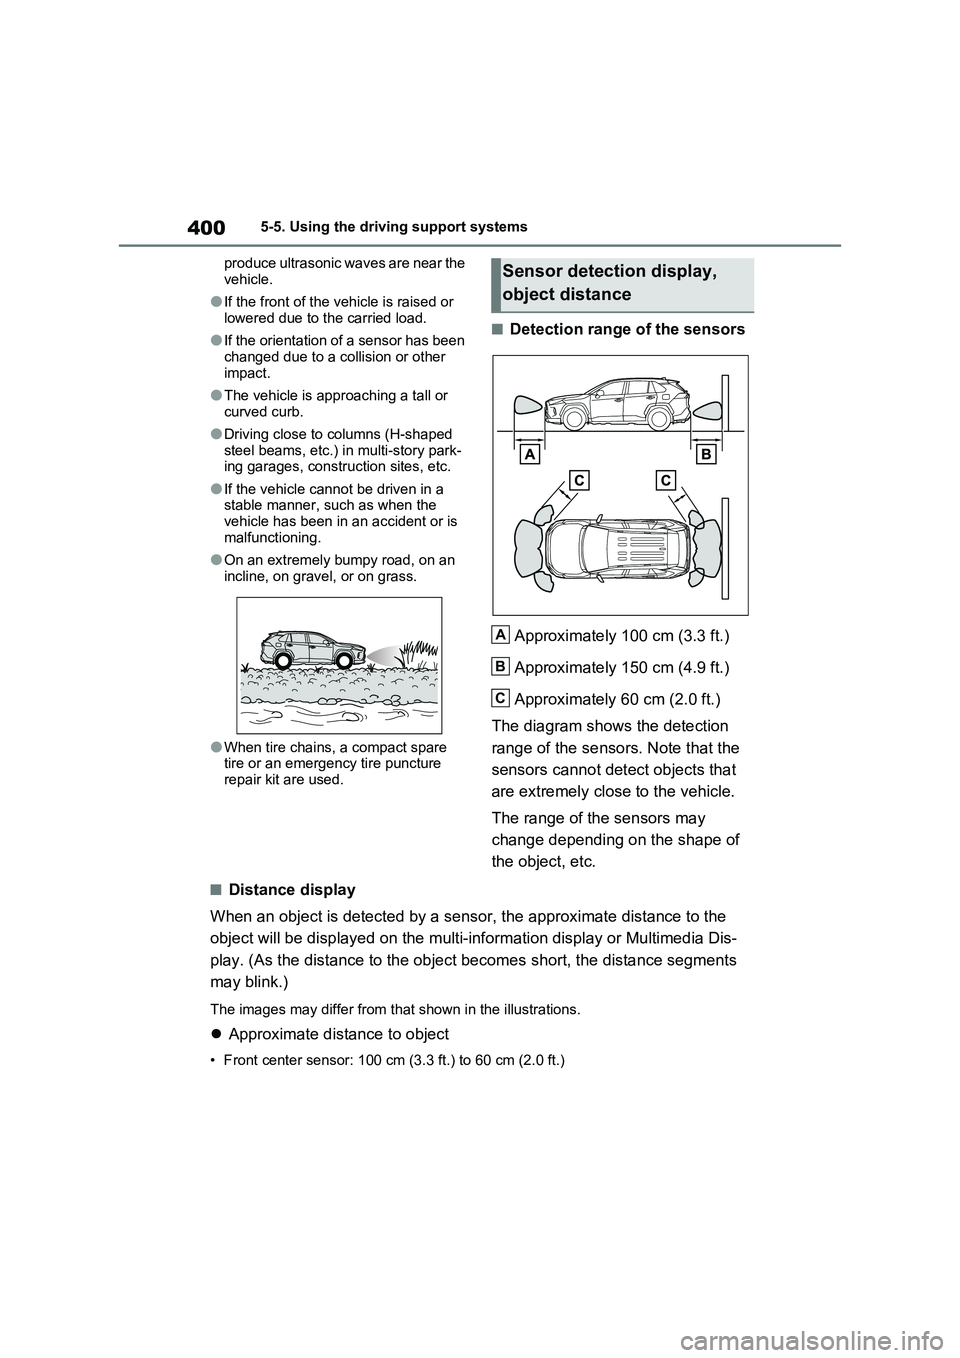 TOYOTA RAV4 PLUG-IN HYBRID 2023  Owners Manual 4005-5. Using the driving support systems
produce ultrasonic waves are near the 
vehicle.
●If the front of the vehicle is raised or 
lowered due to the carried load.
●If the orientation of a senso